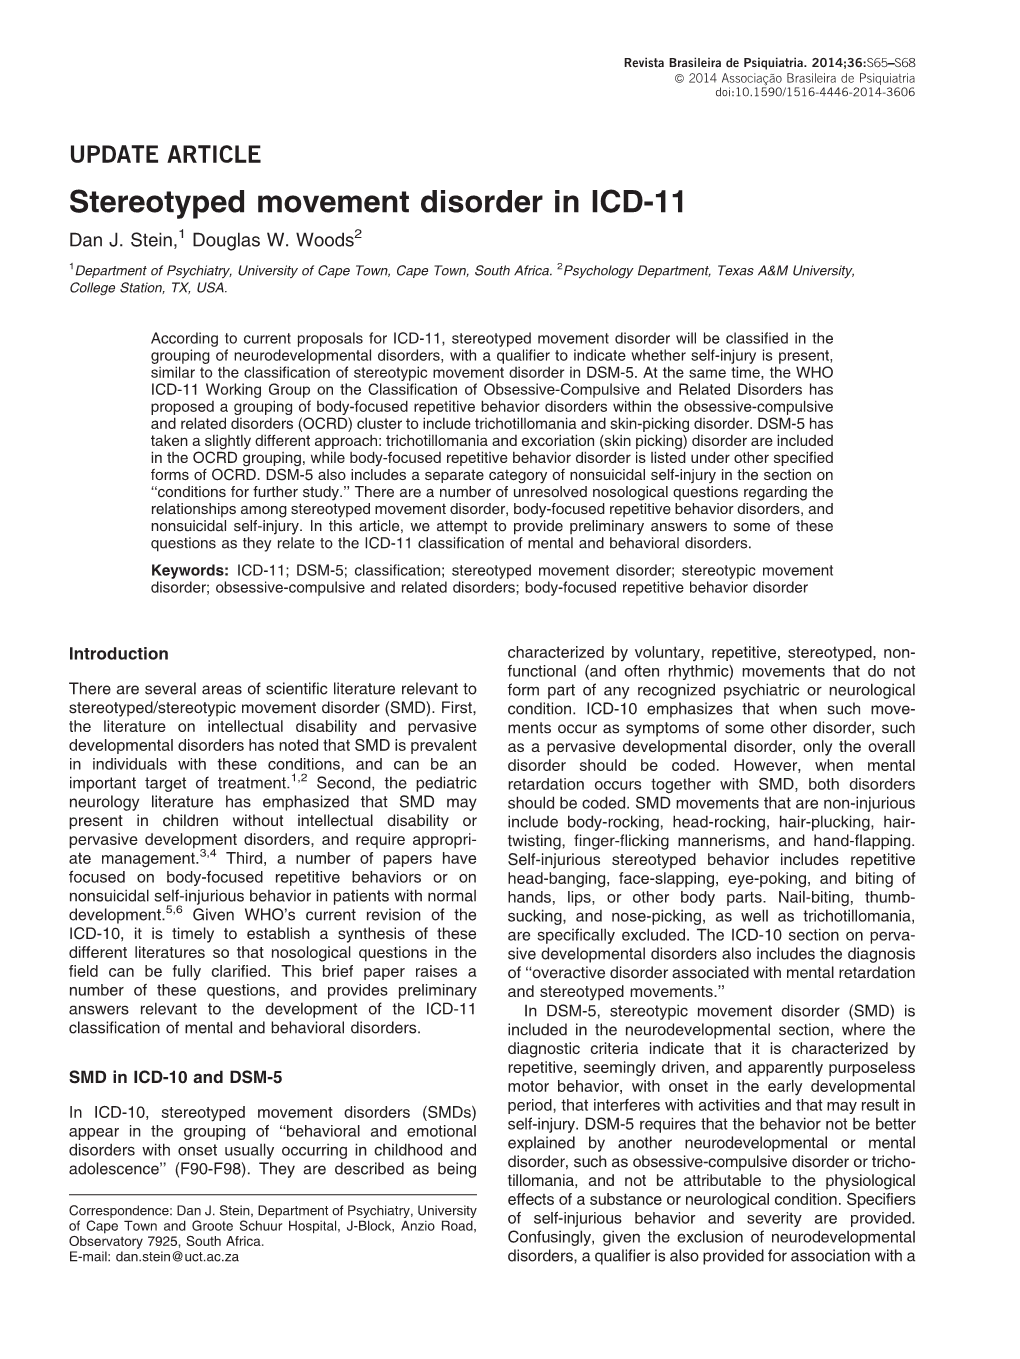 Stereotyped Movement Disorder in ICD-11 Dan J